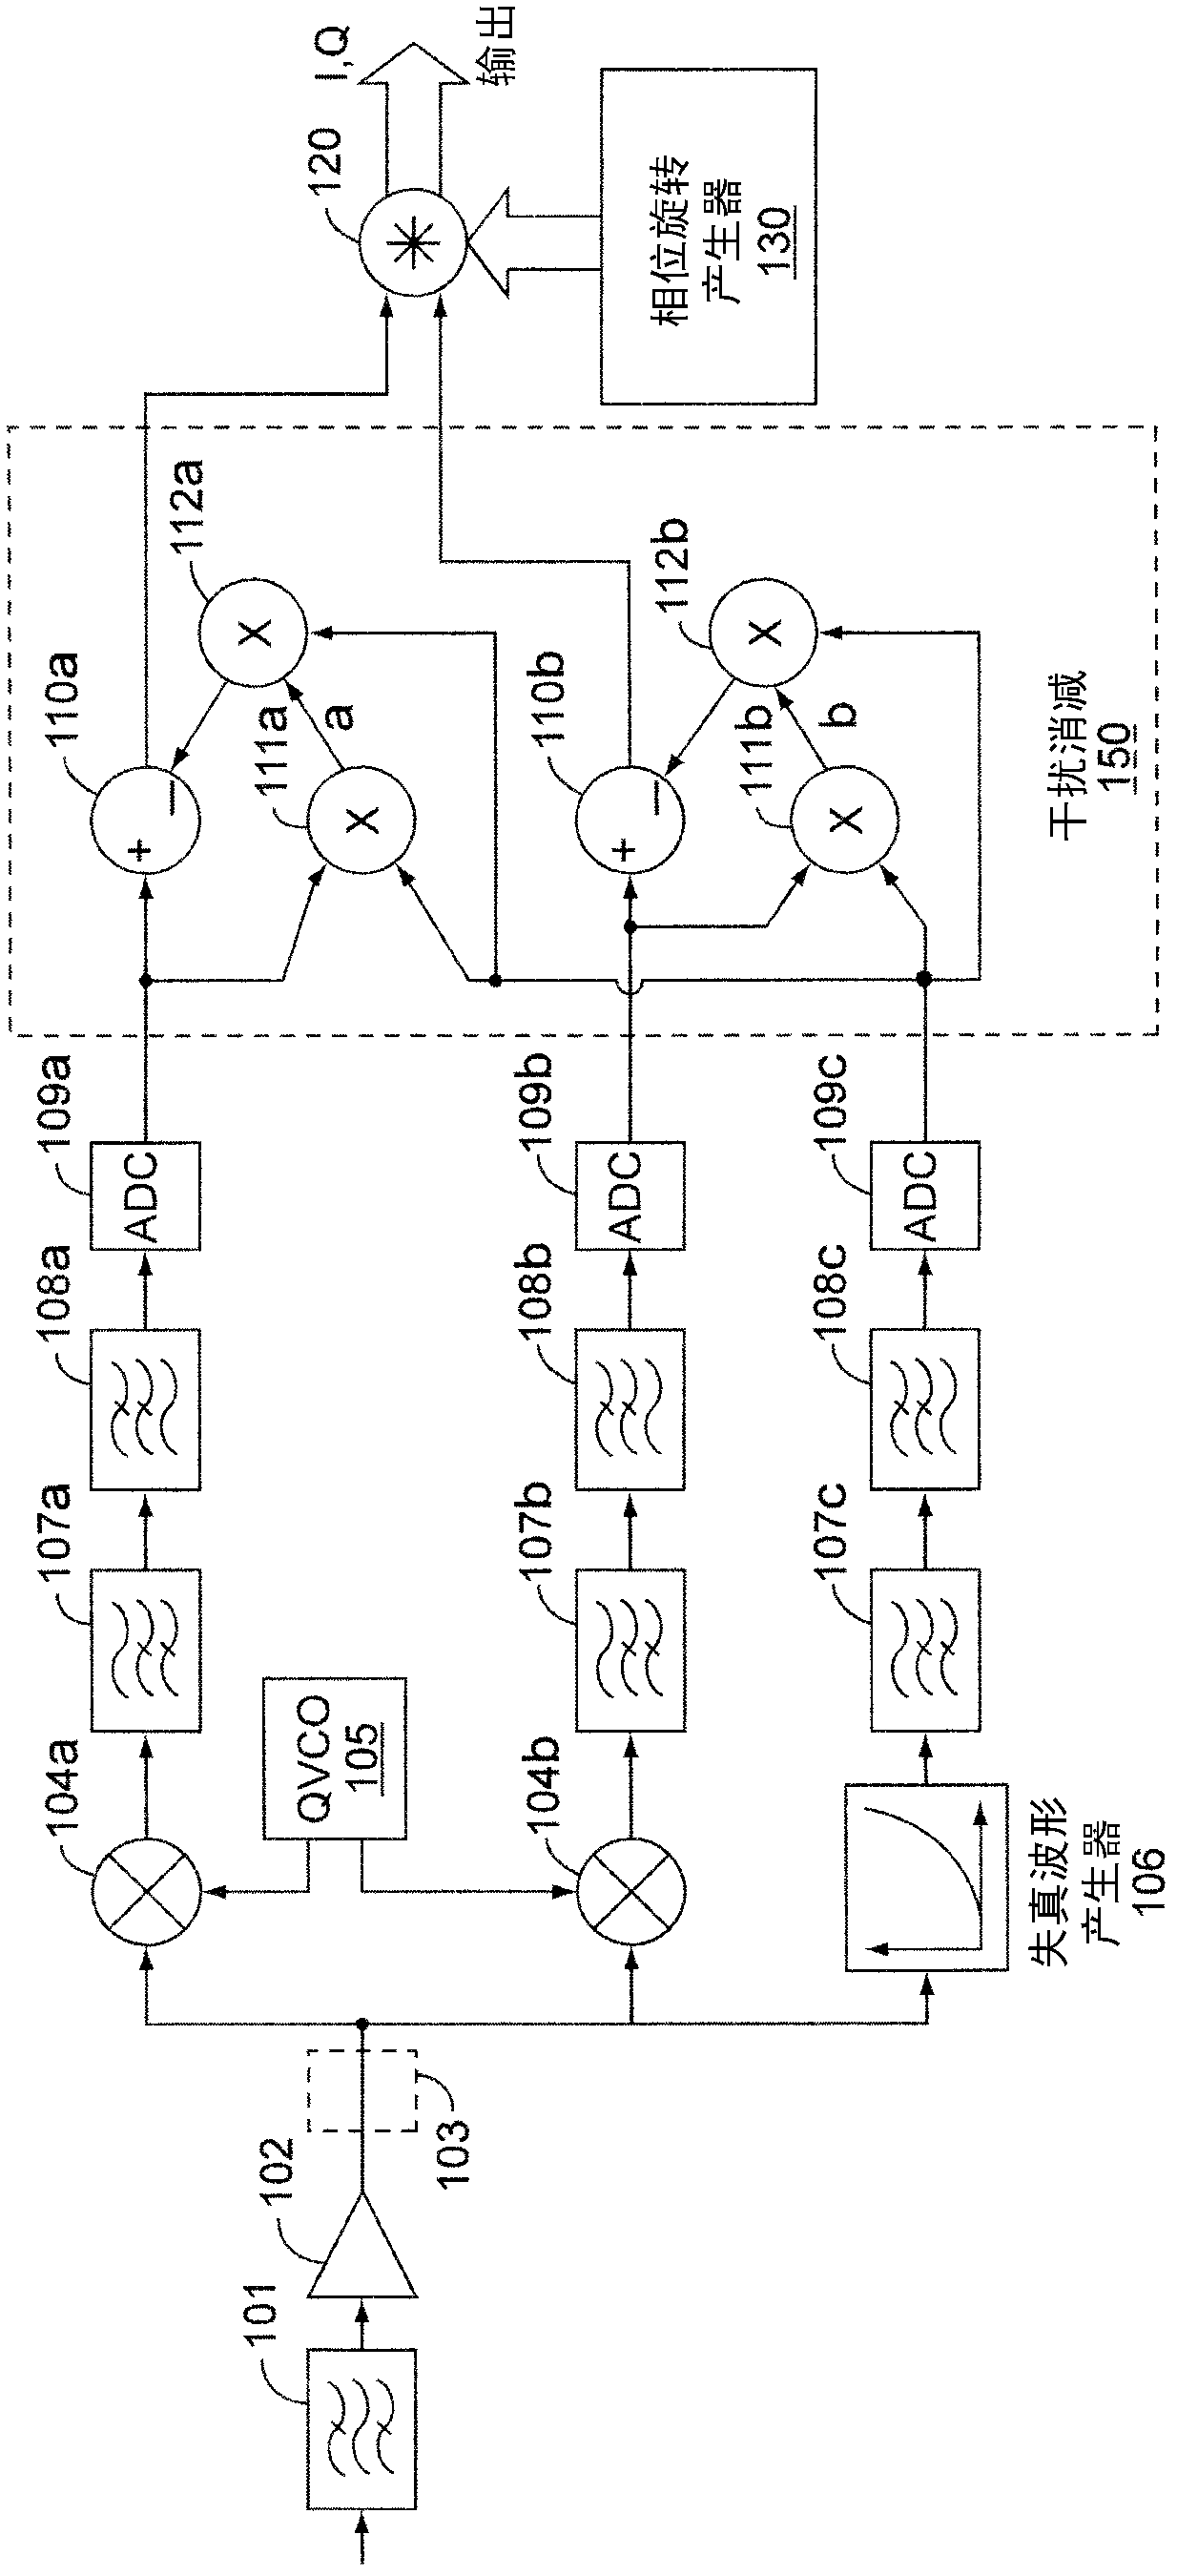 Interference cancellation in an OFDM receiver